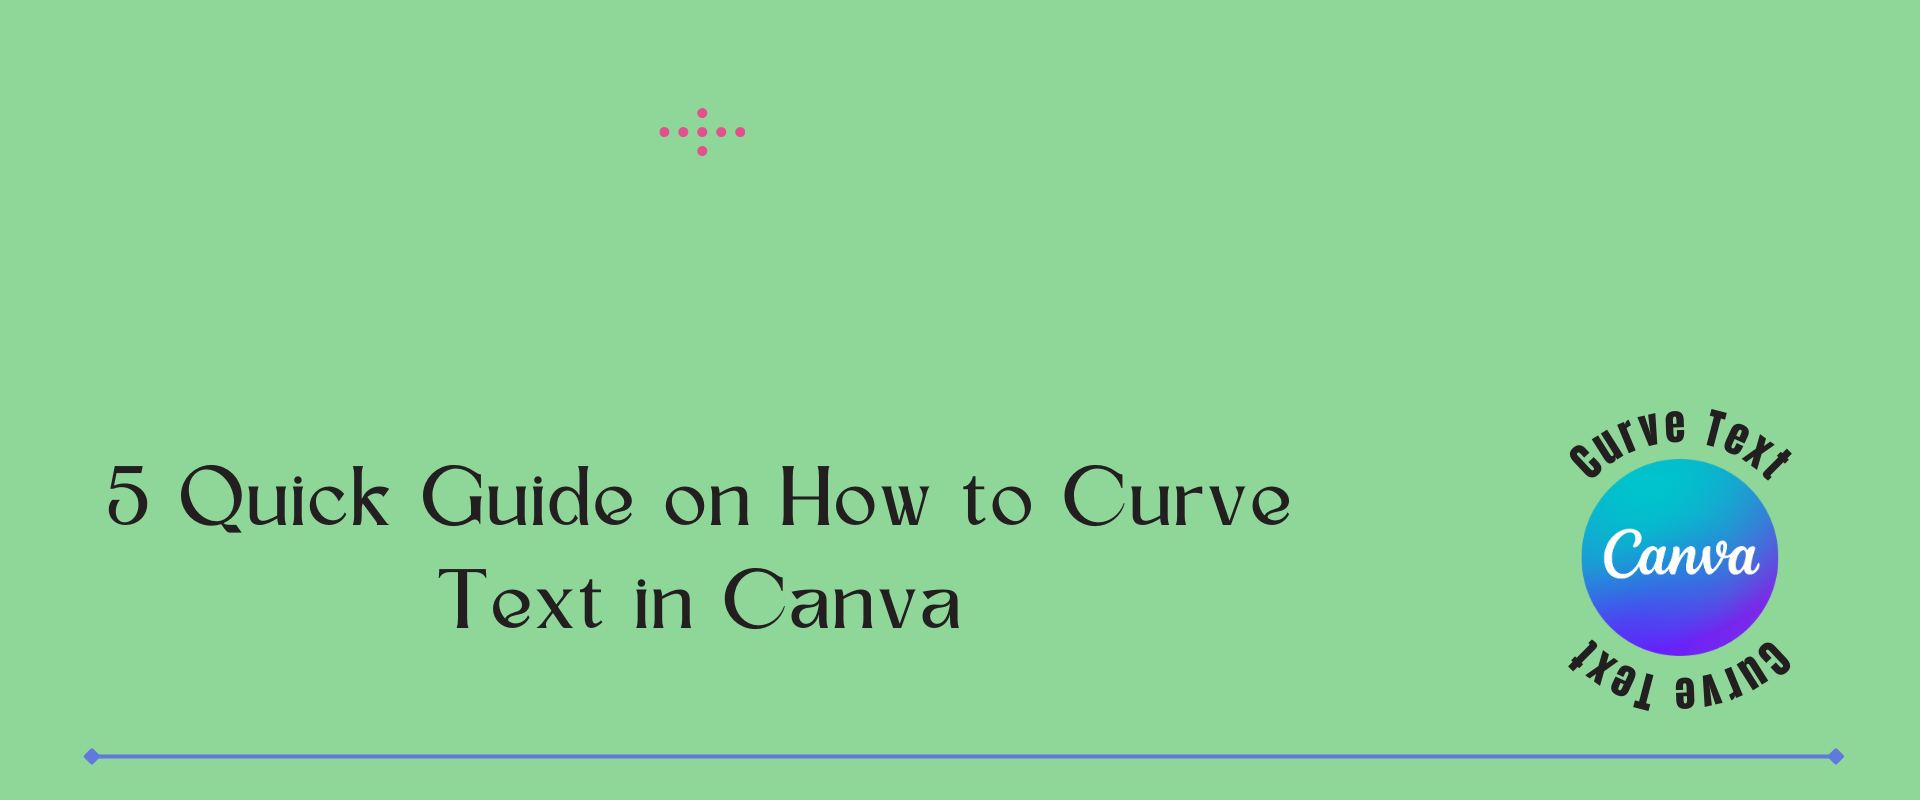 5 Quick Guide on How to Curve Text in Canva